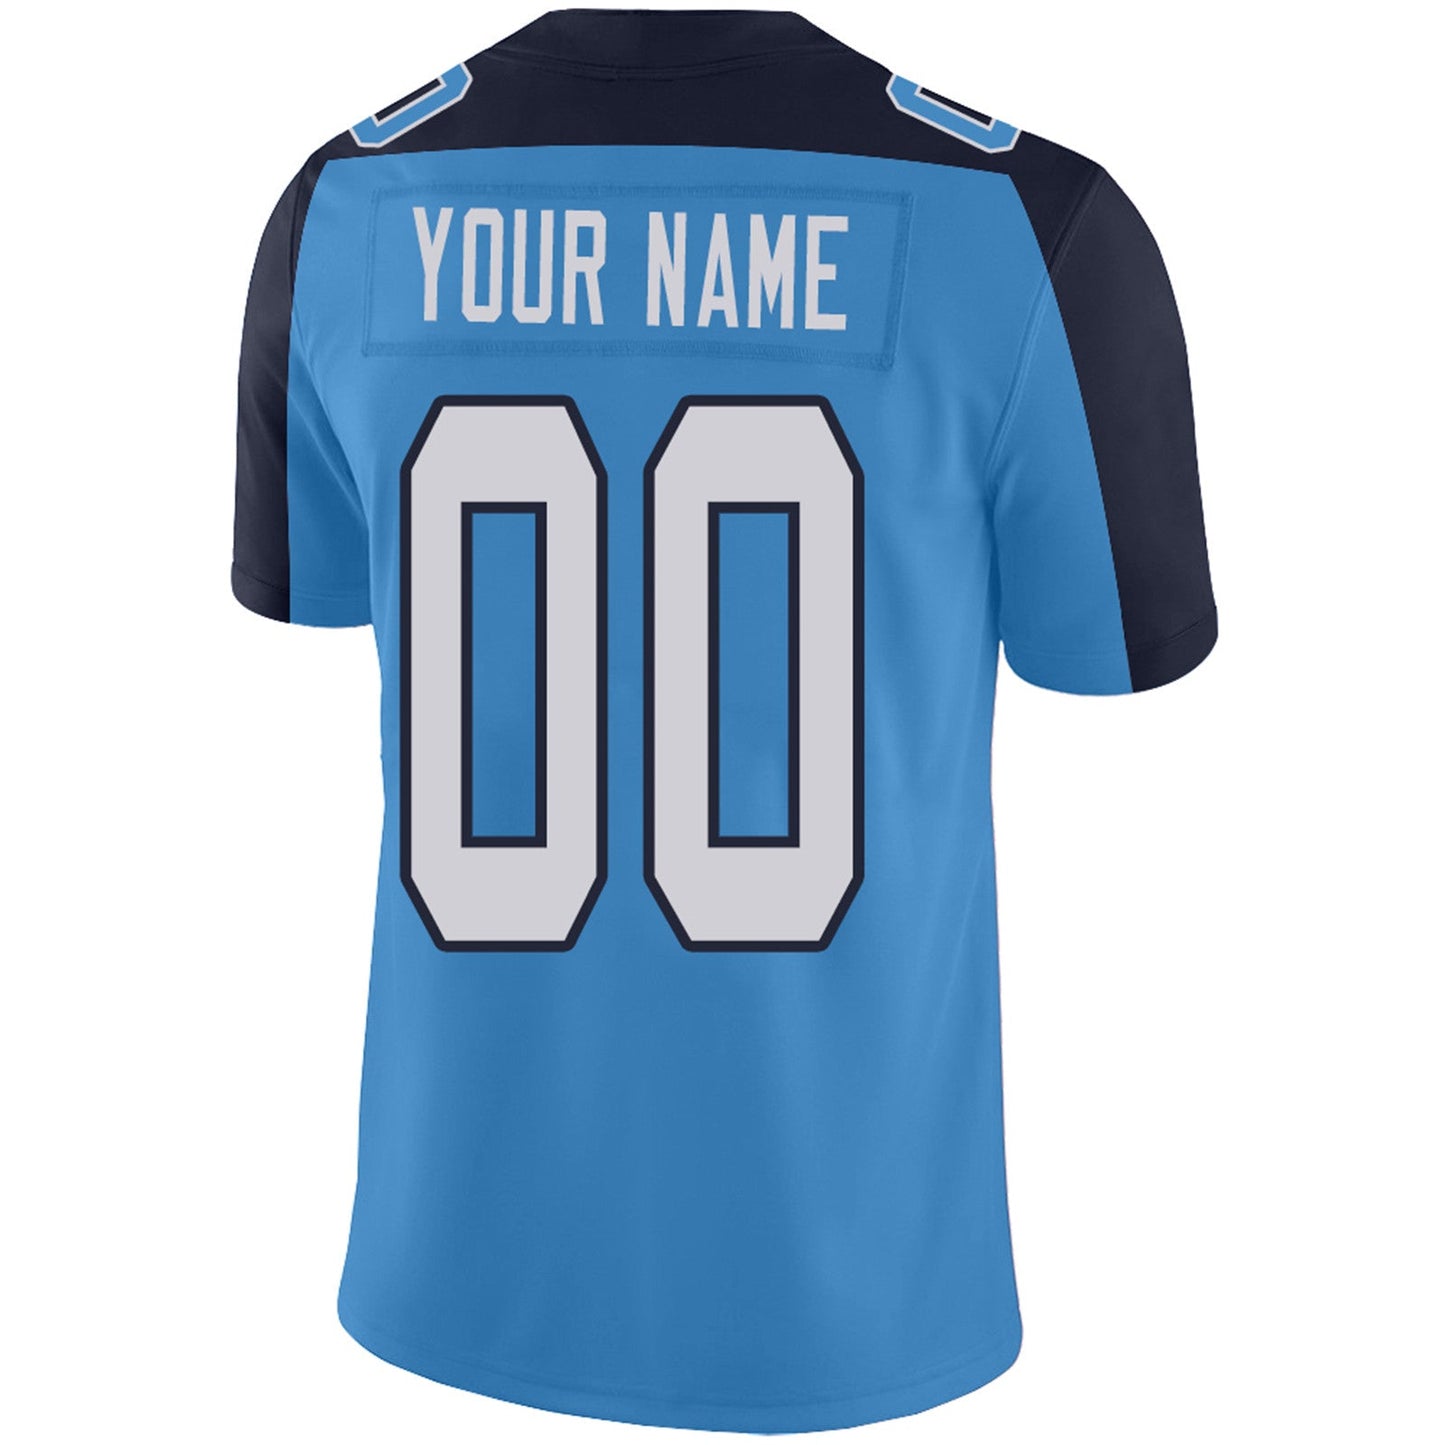 Custom T.Titans Football Jerseys Team Player or Personalized Design Your Own Name for Men's Women's Youth Jerseys Navy